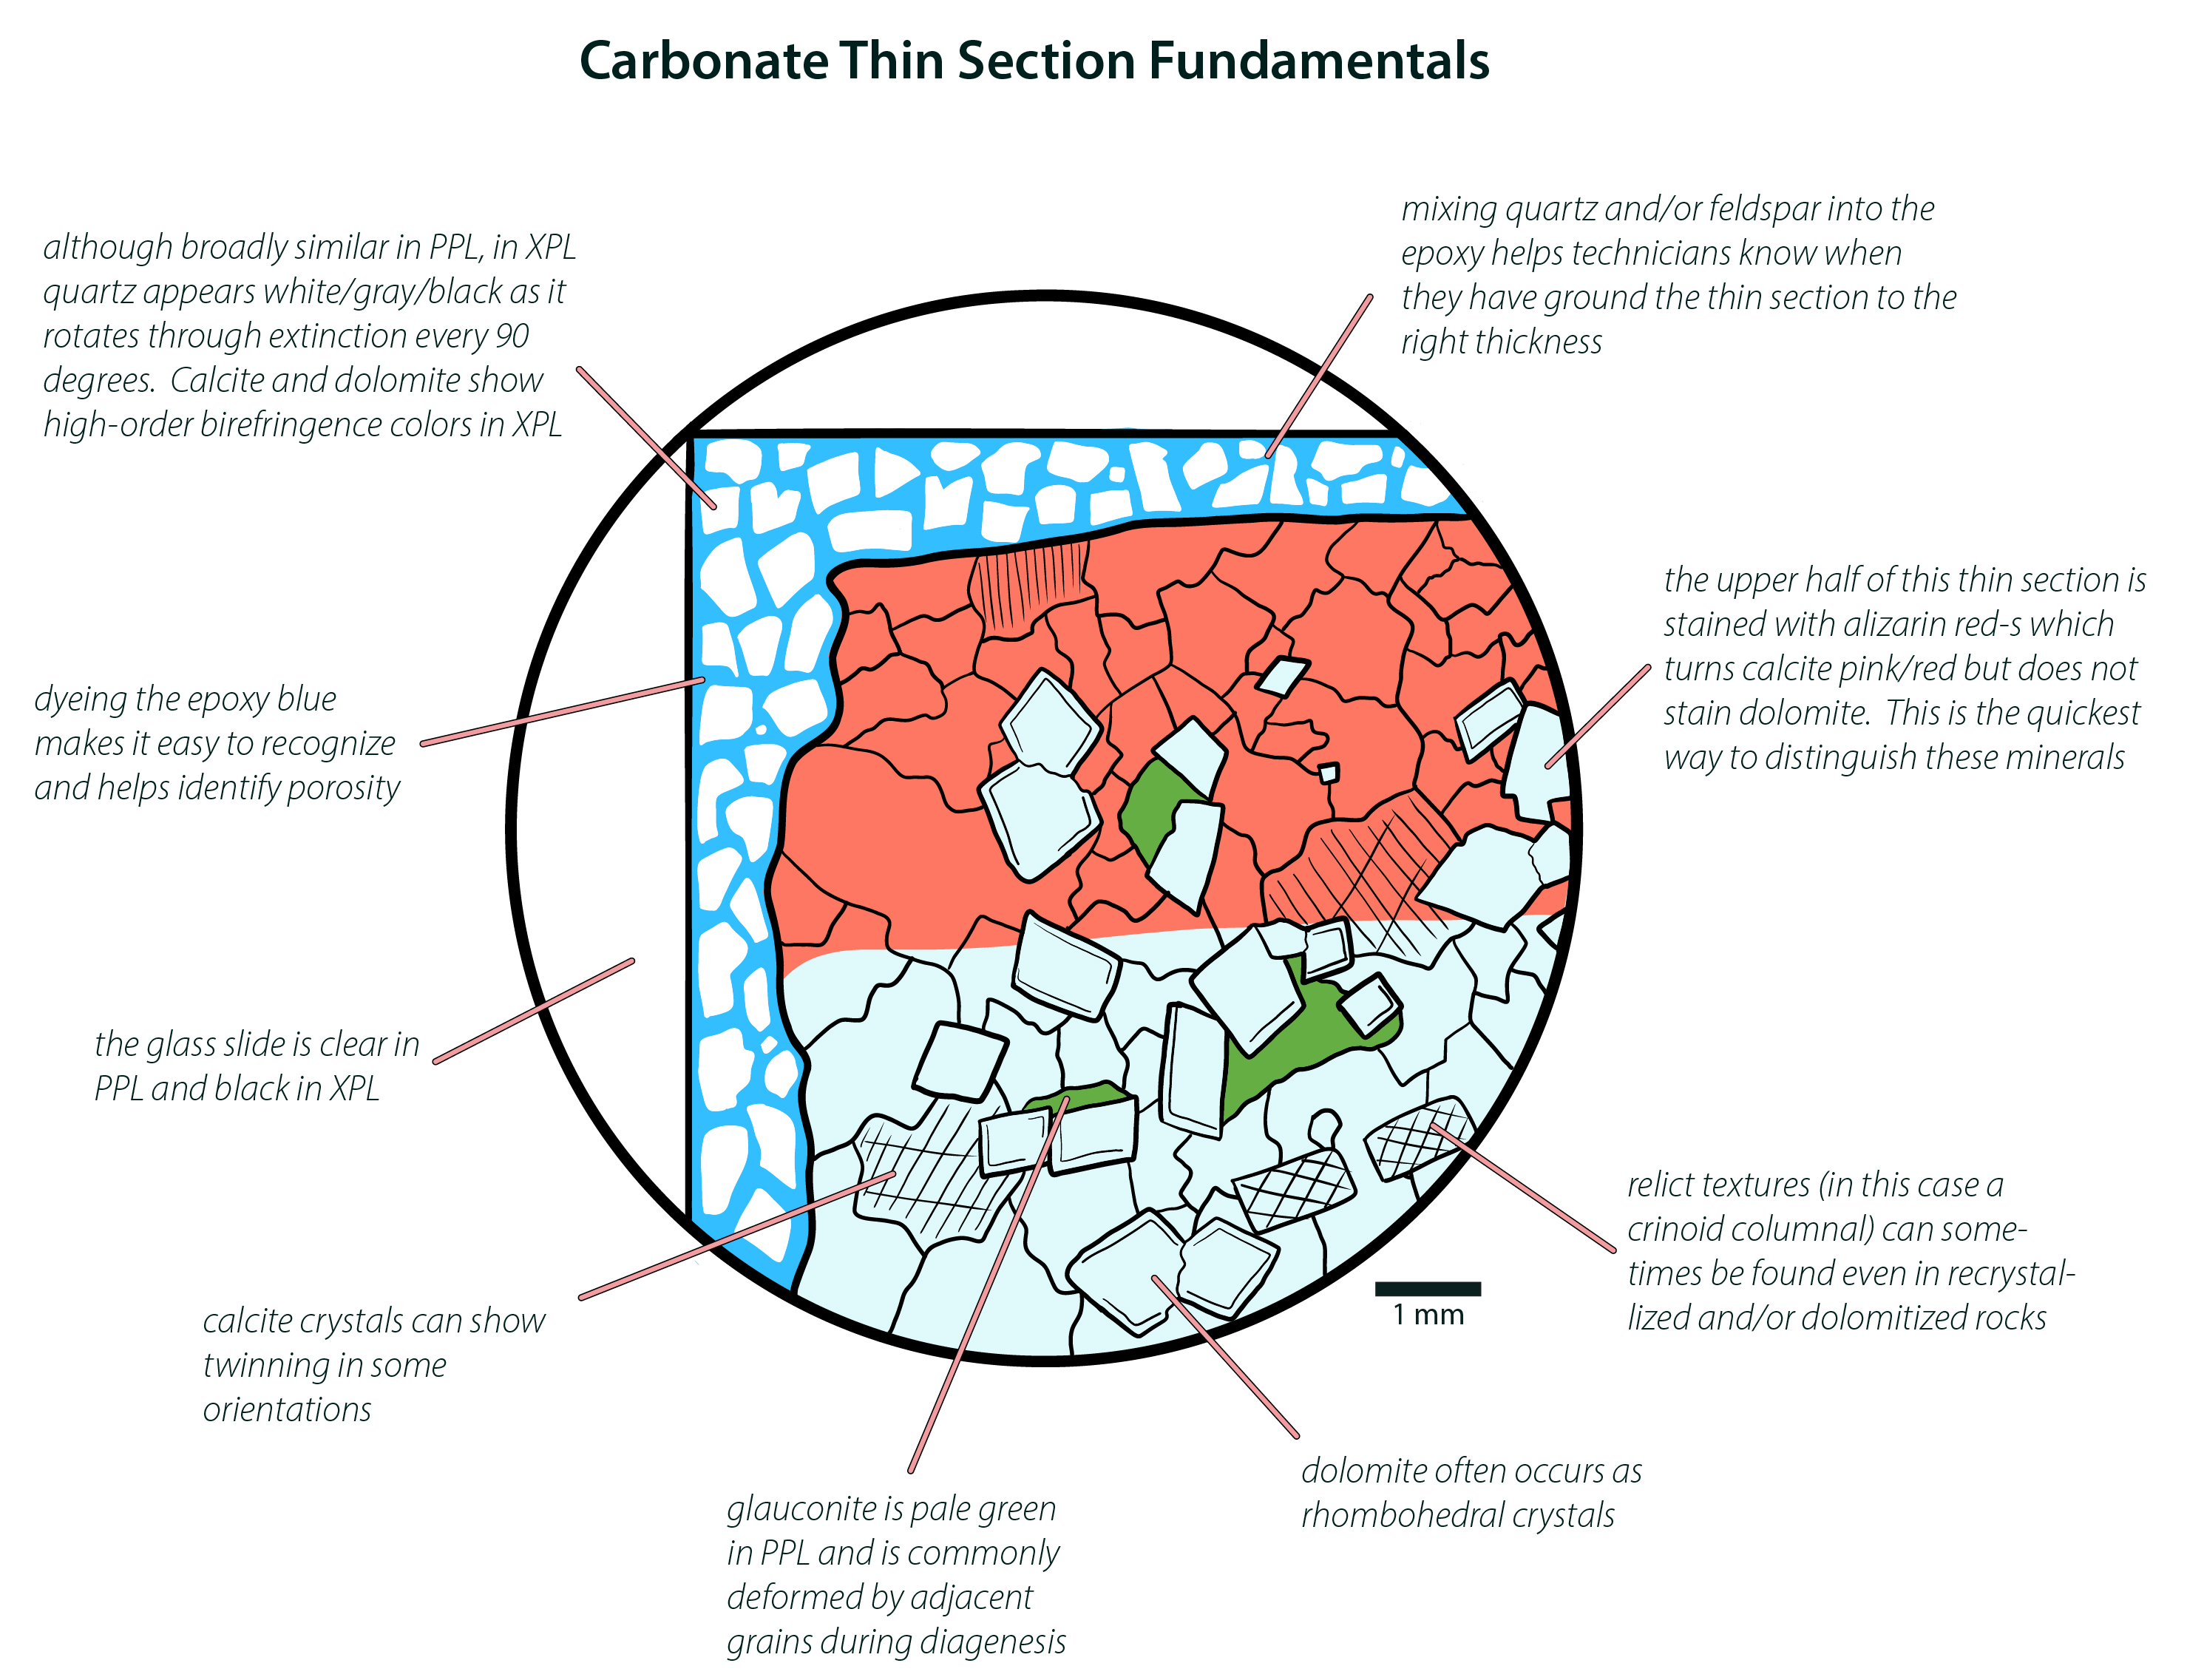 Carbonate Thin Section Fundamentals.jpg